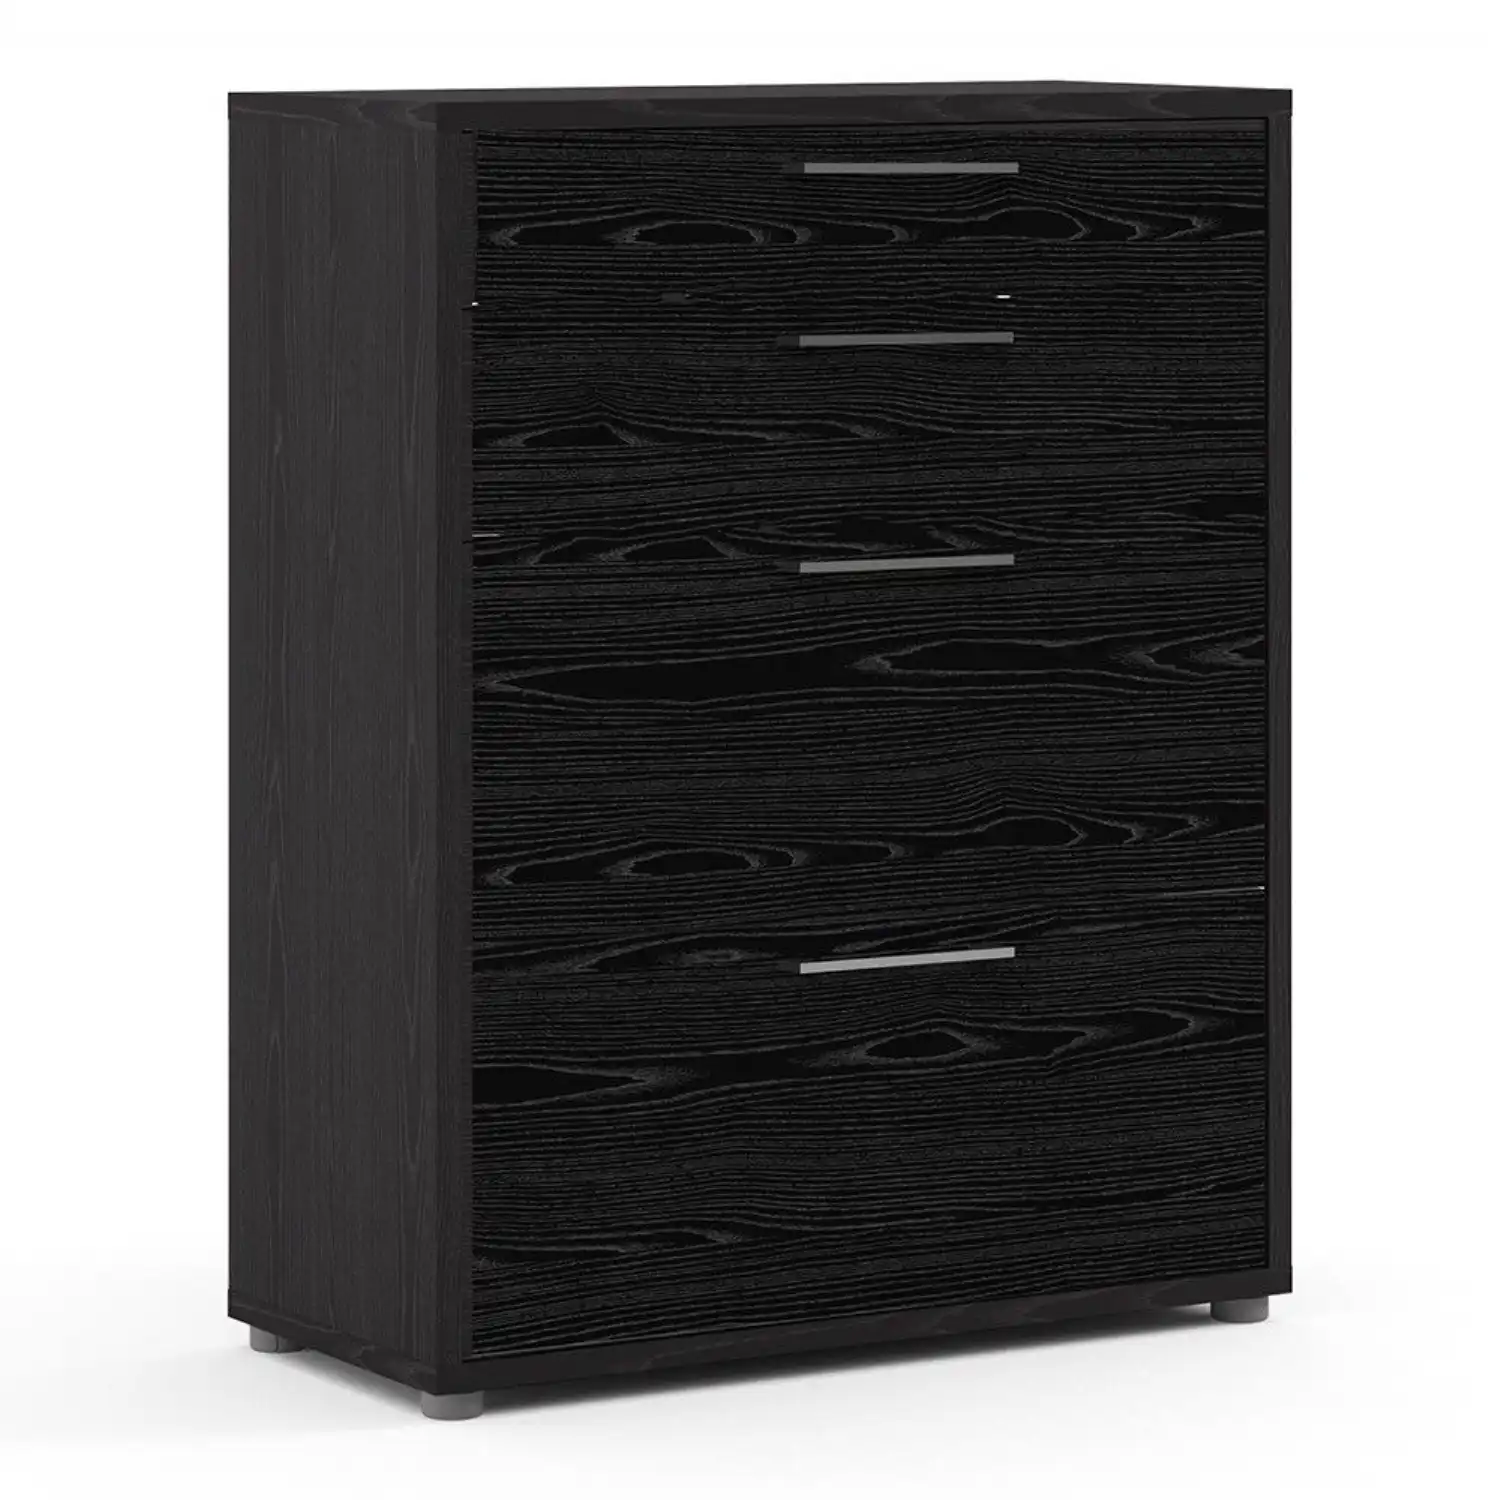 Bookcase 2 Shelves With 2 Drawers 2 File Drawers in Black woodgrain